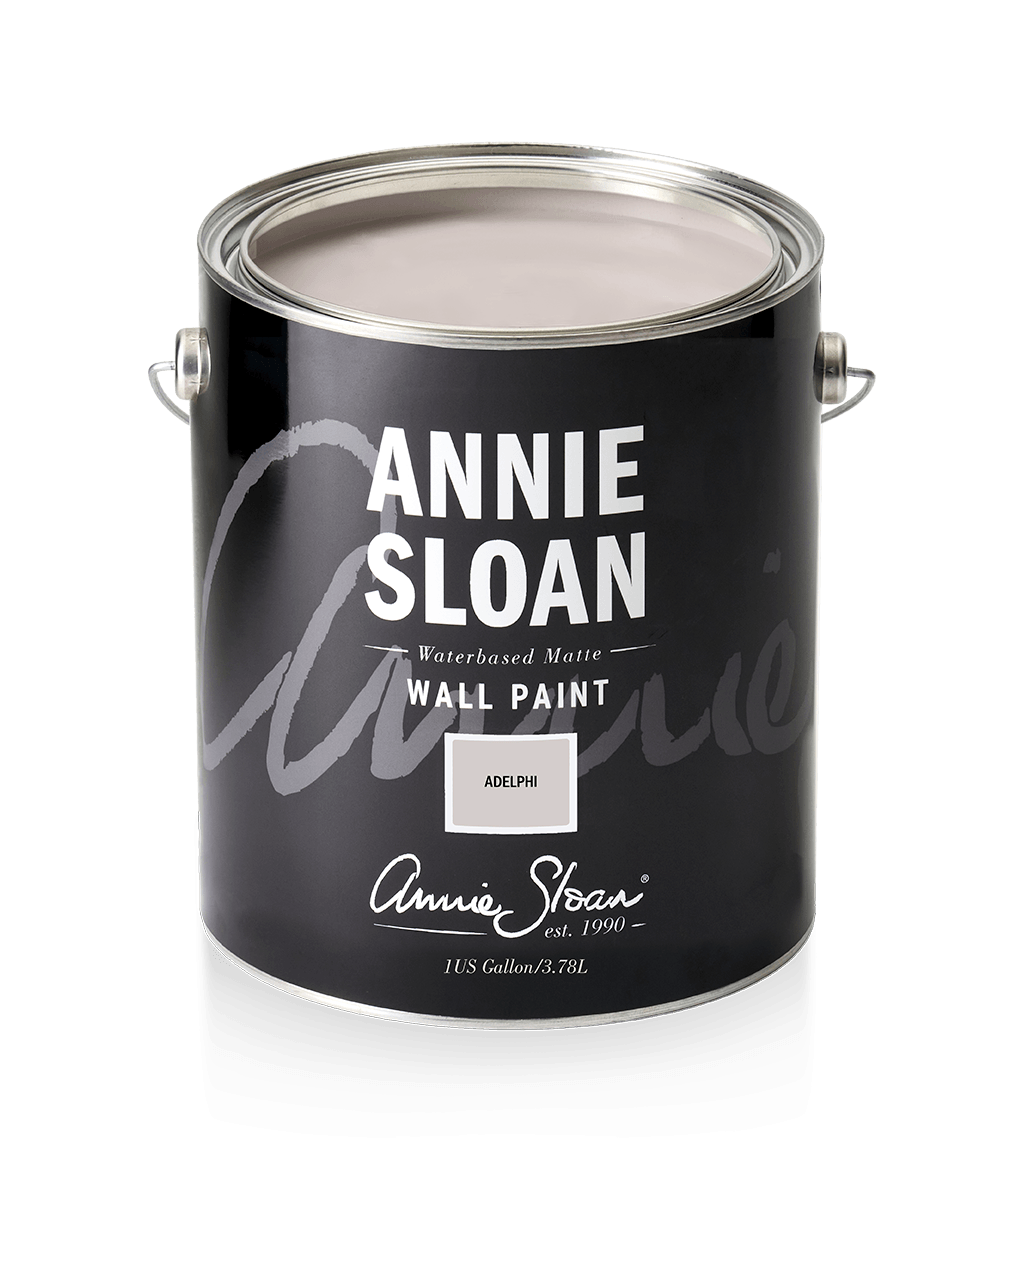 Annie Sloan Wall Paint Adelphi - 1 Gallon - Five and Divine